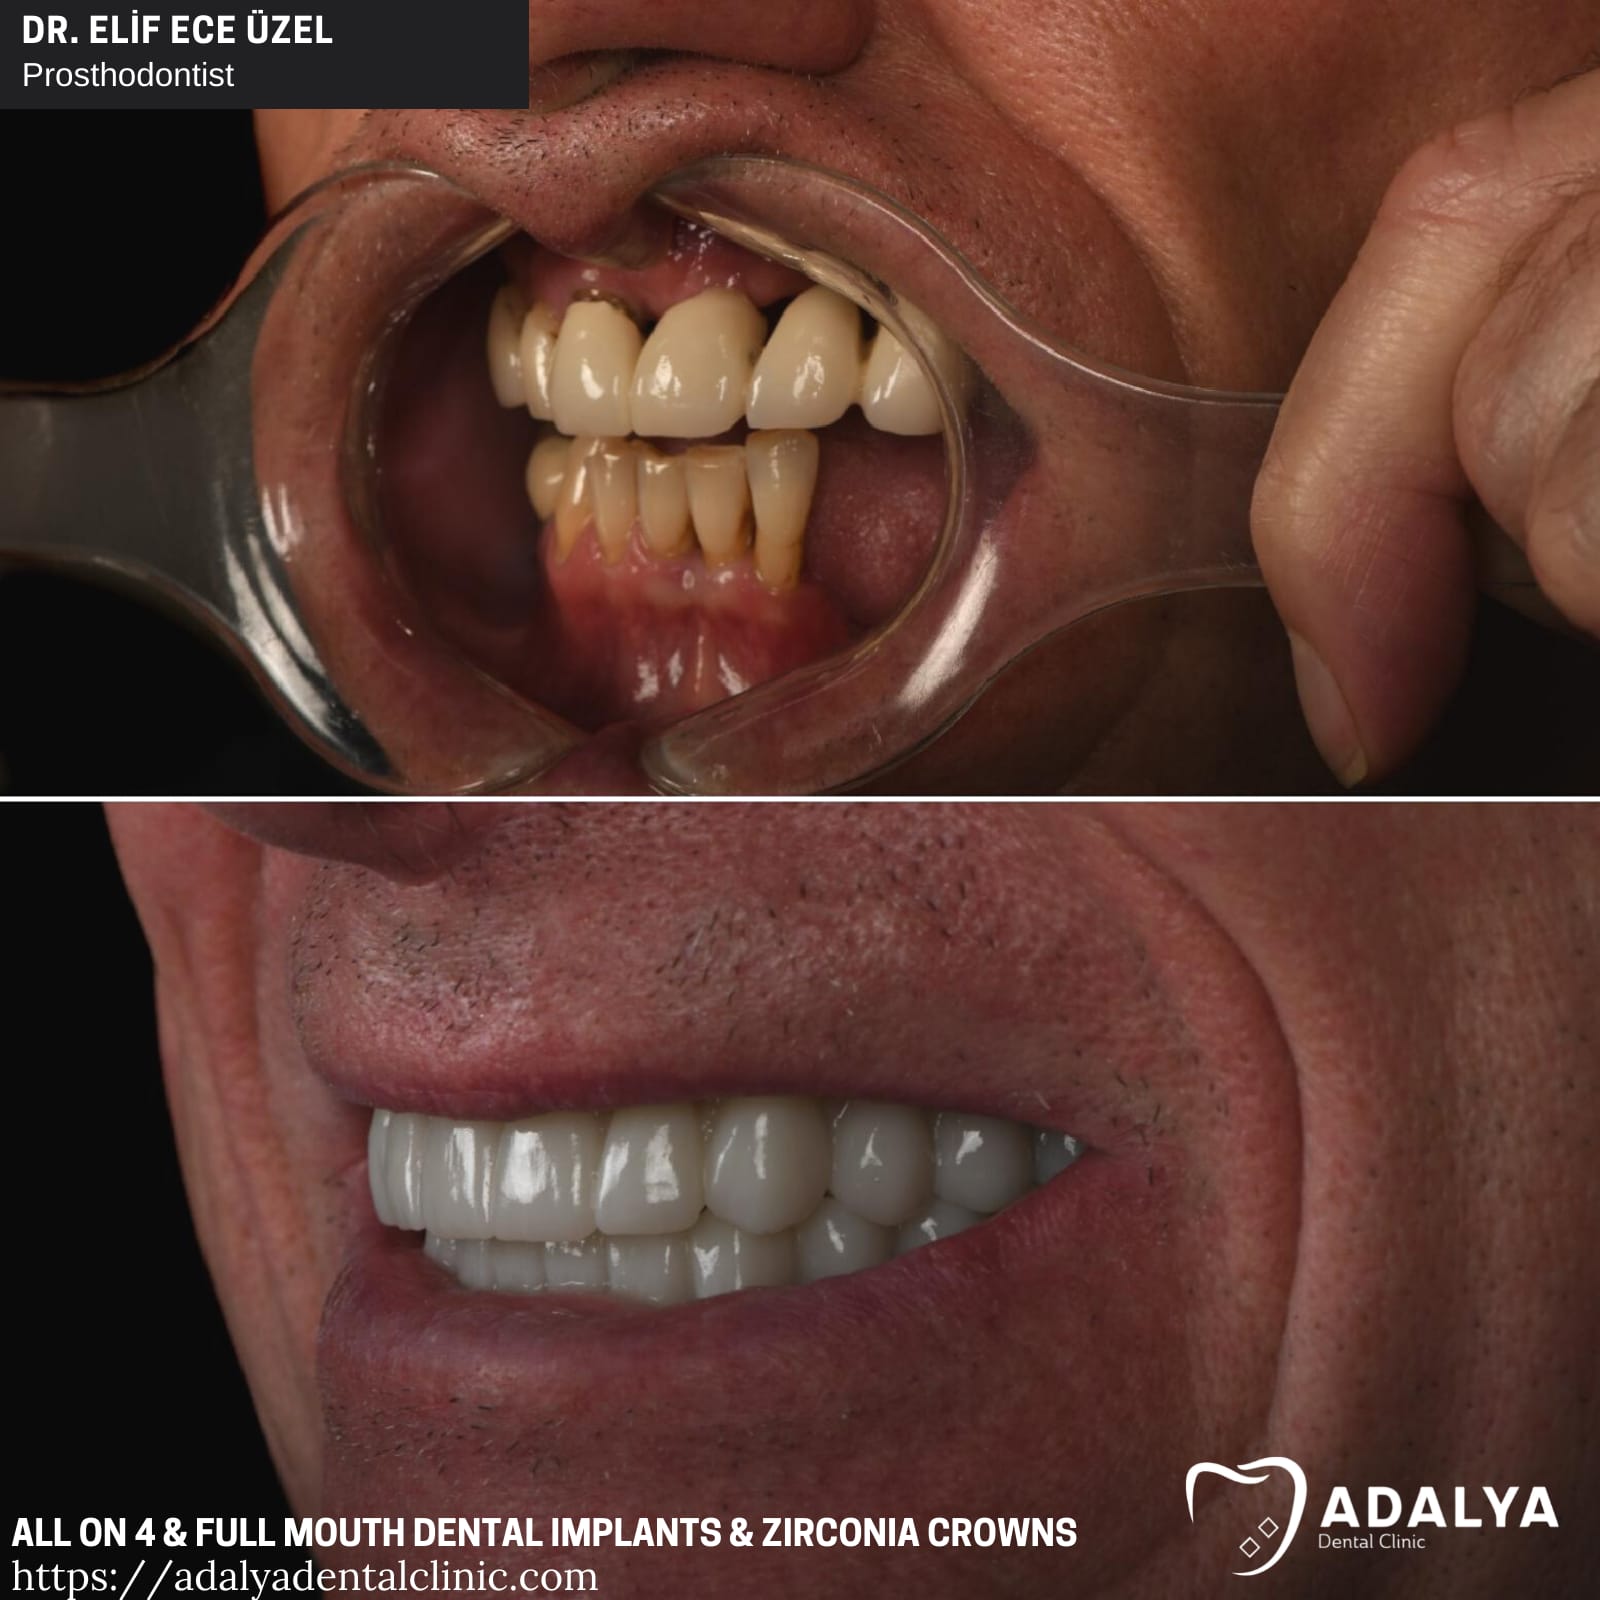 full mouth dental implants turkey package deals reviews cost price antalya tooth